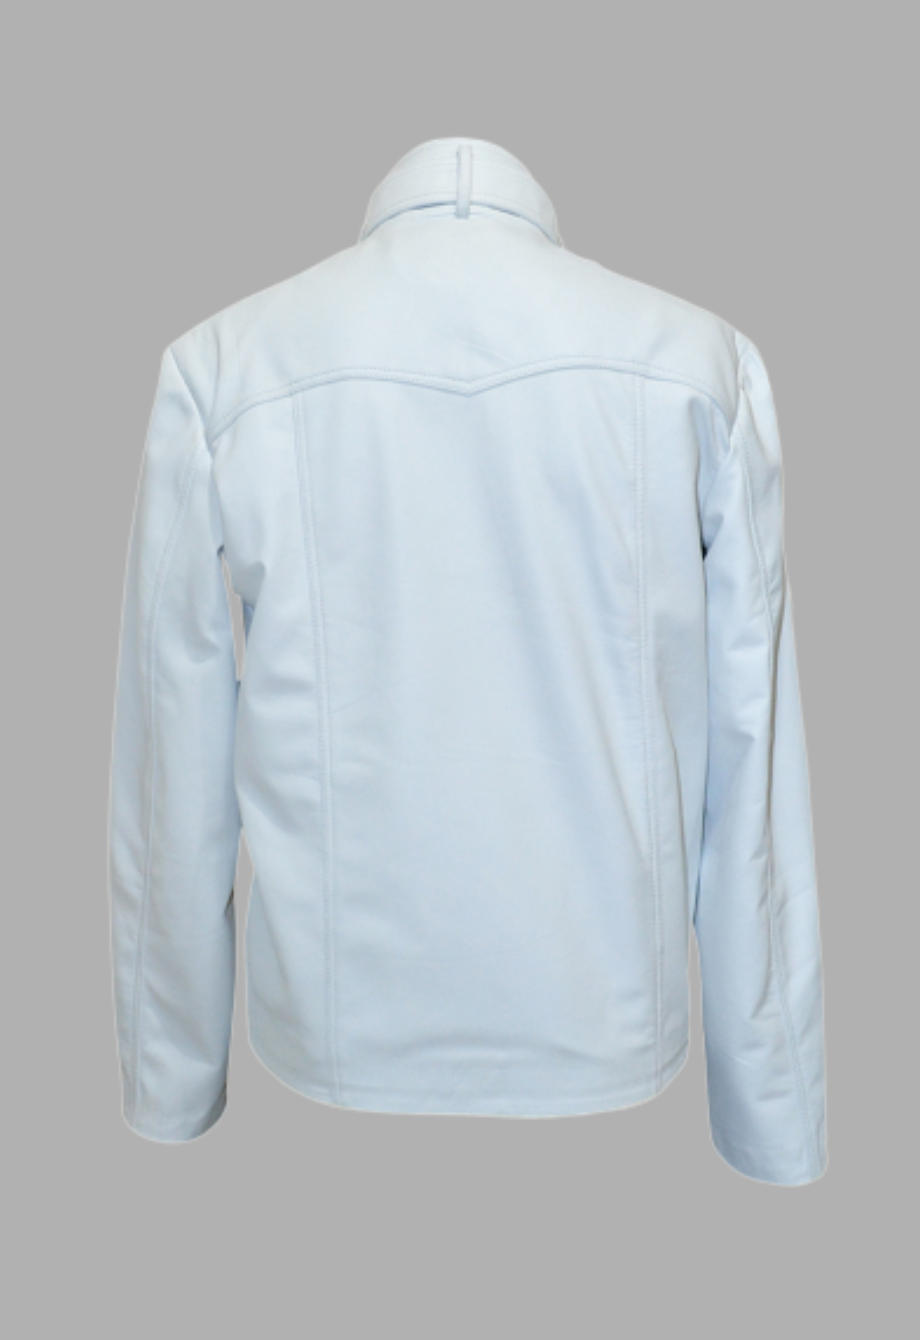 Mens White Snap Collar Leather Jacket